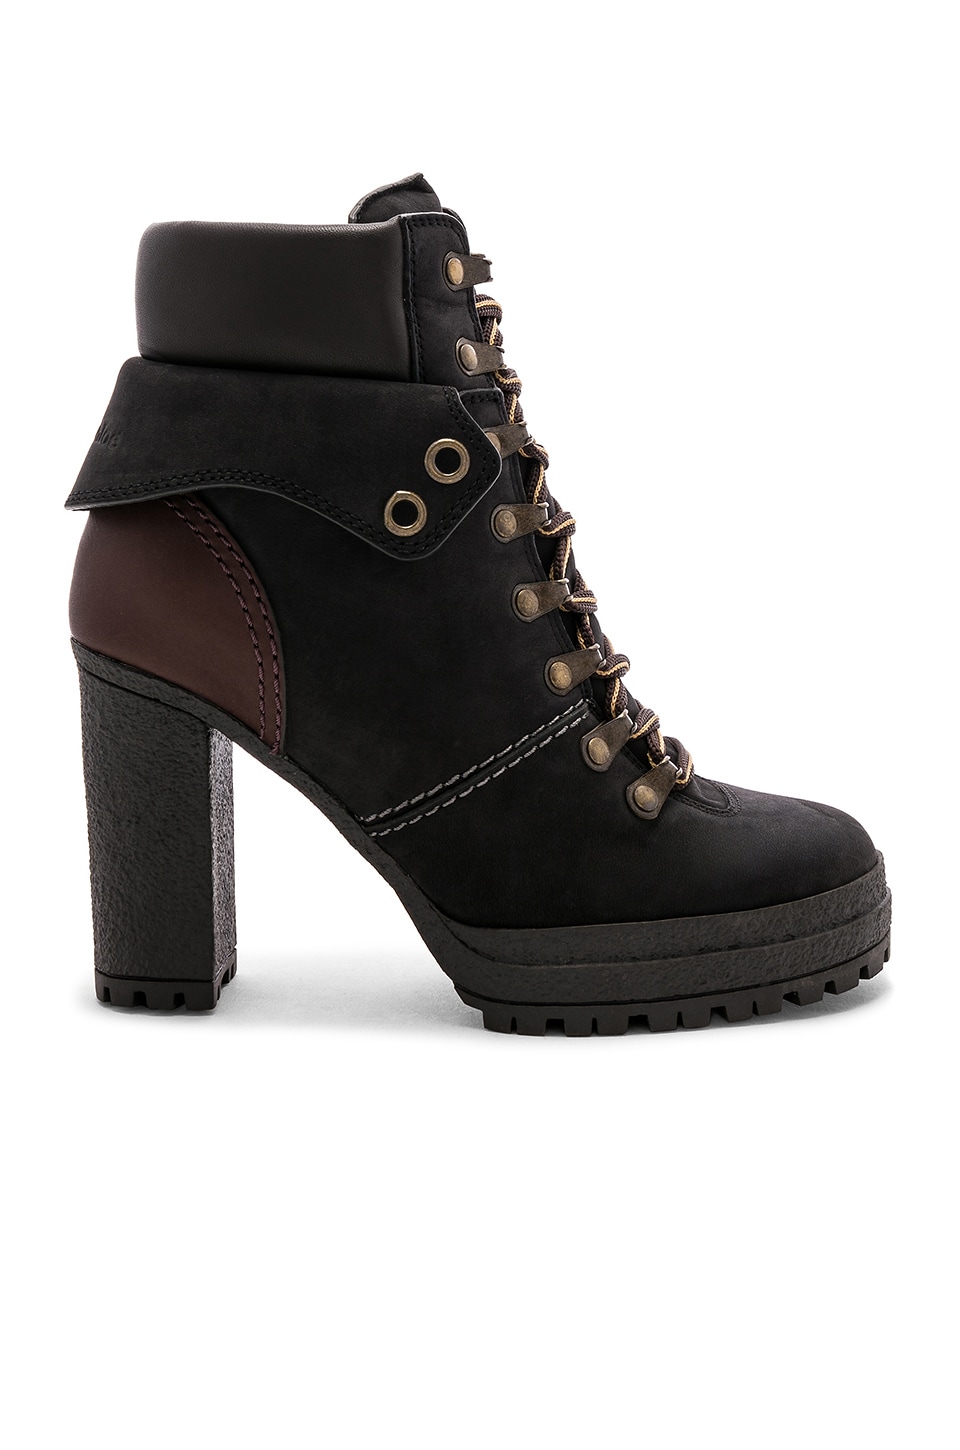 see by chloe eileen lace up boots